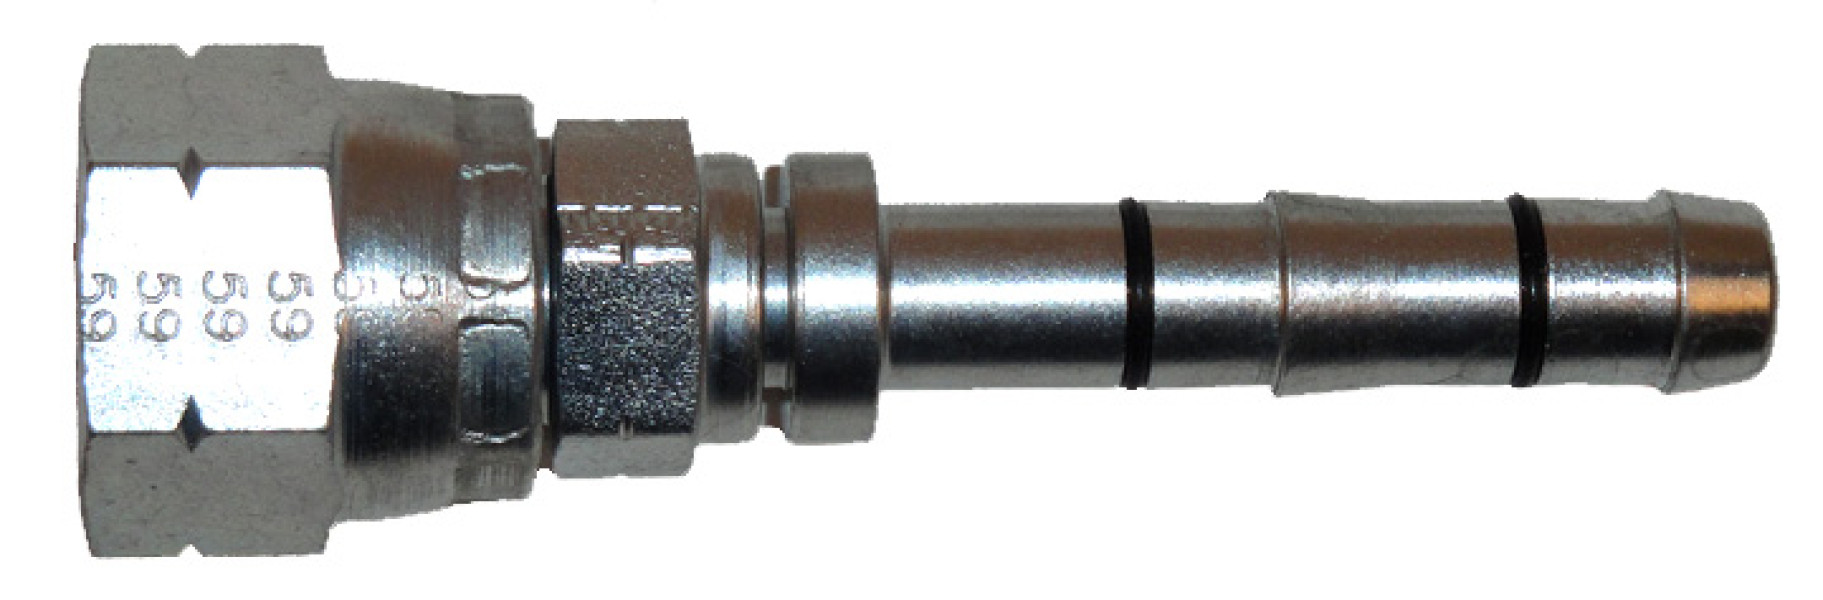 Image of A/C Refrigerant Hose Fitting from Sunair. Part number: FF14241